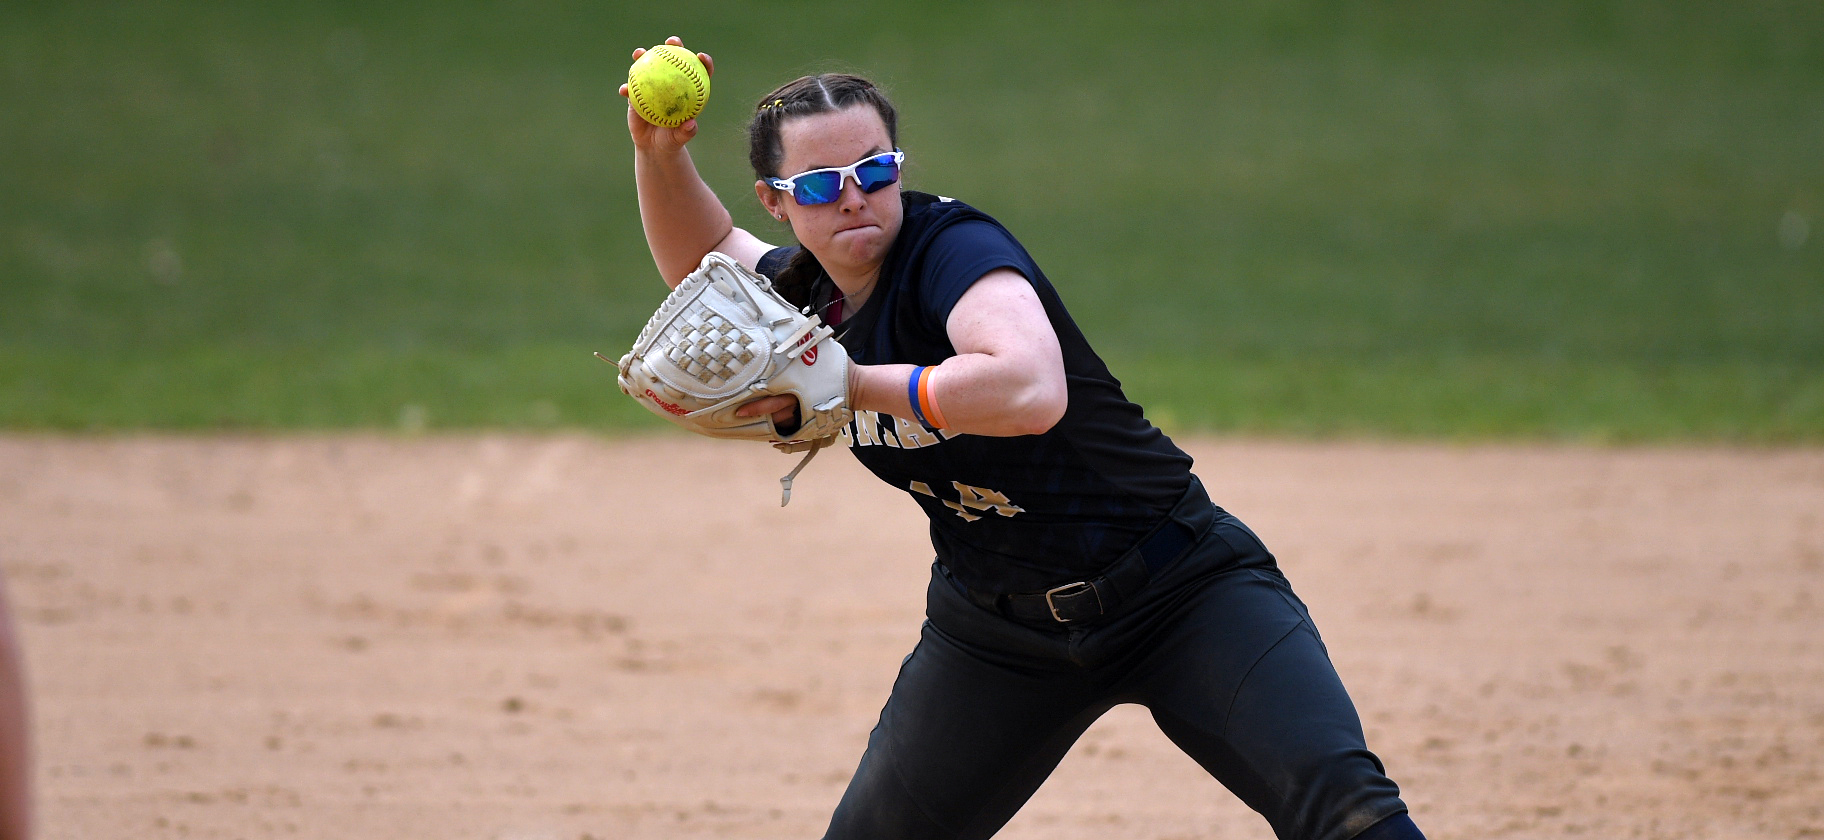 Abby Ebright went 2-4 with a run scored and a RBI in game two against Mt. Aloysius.